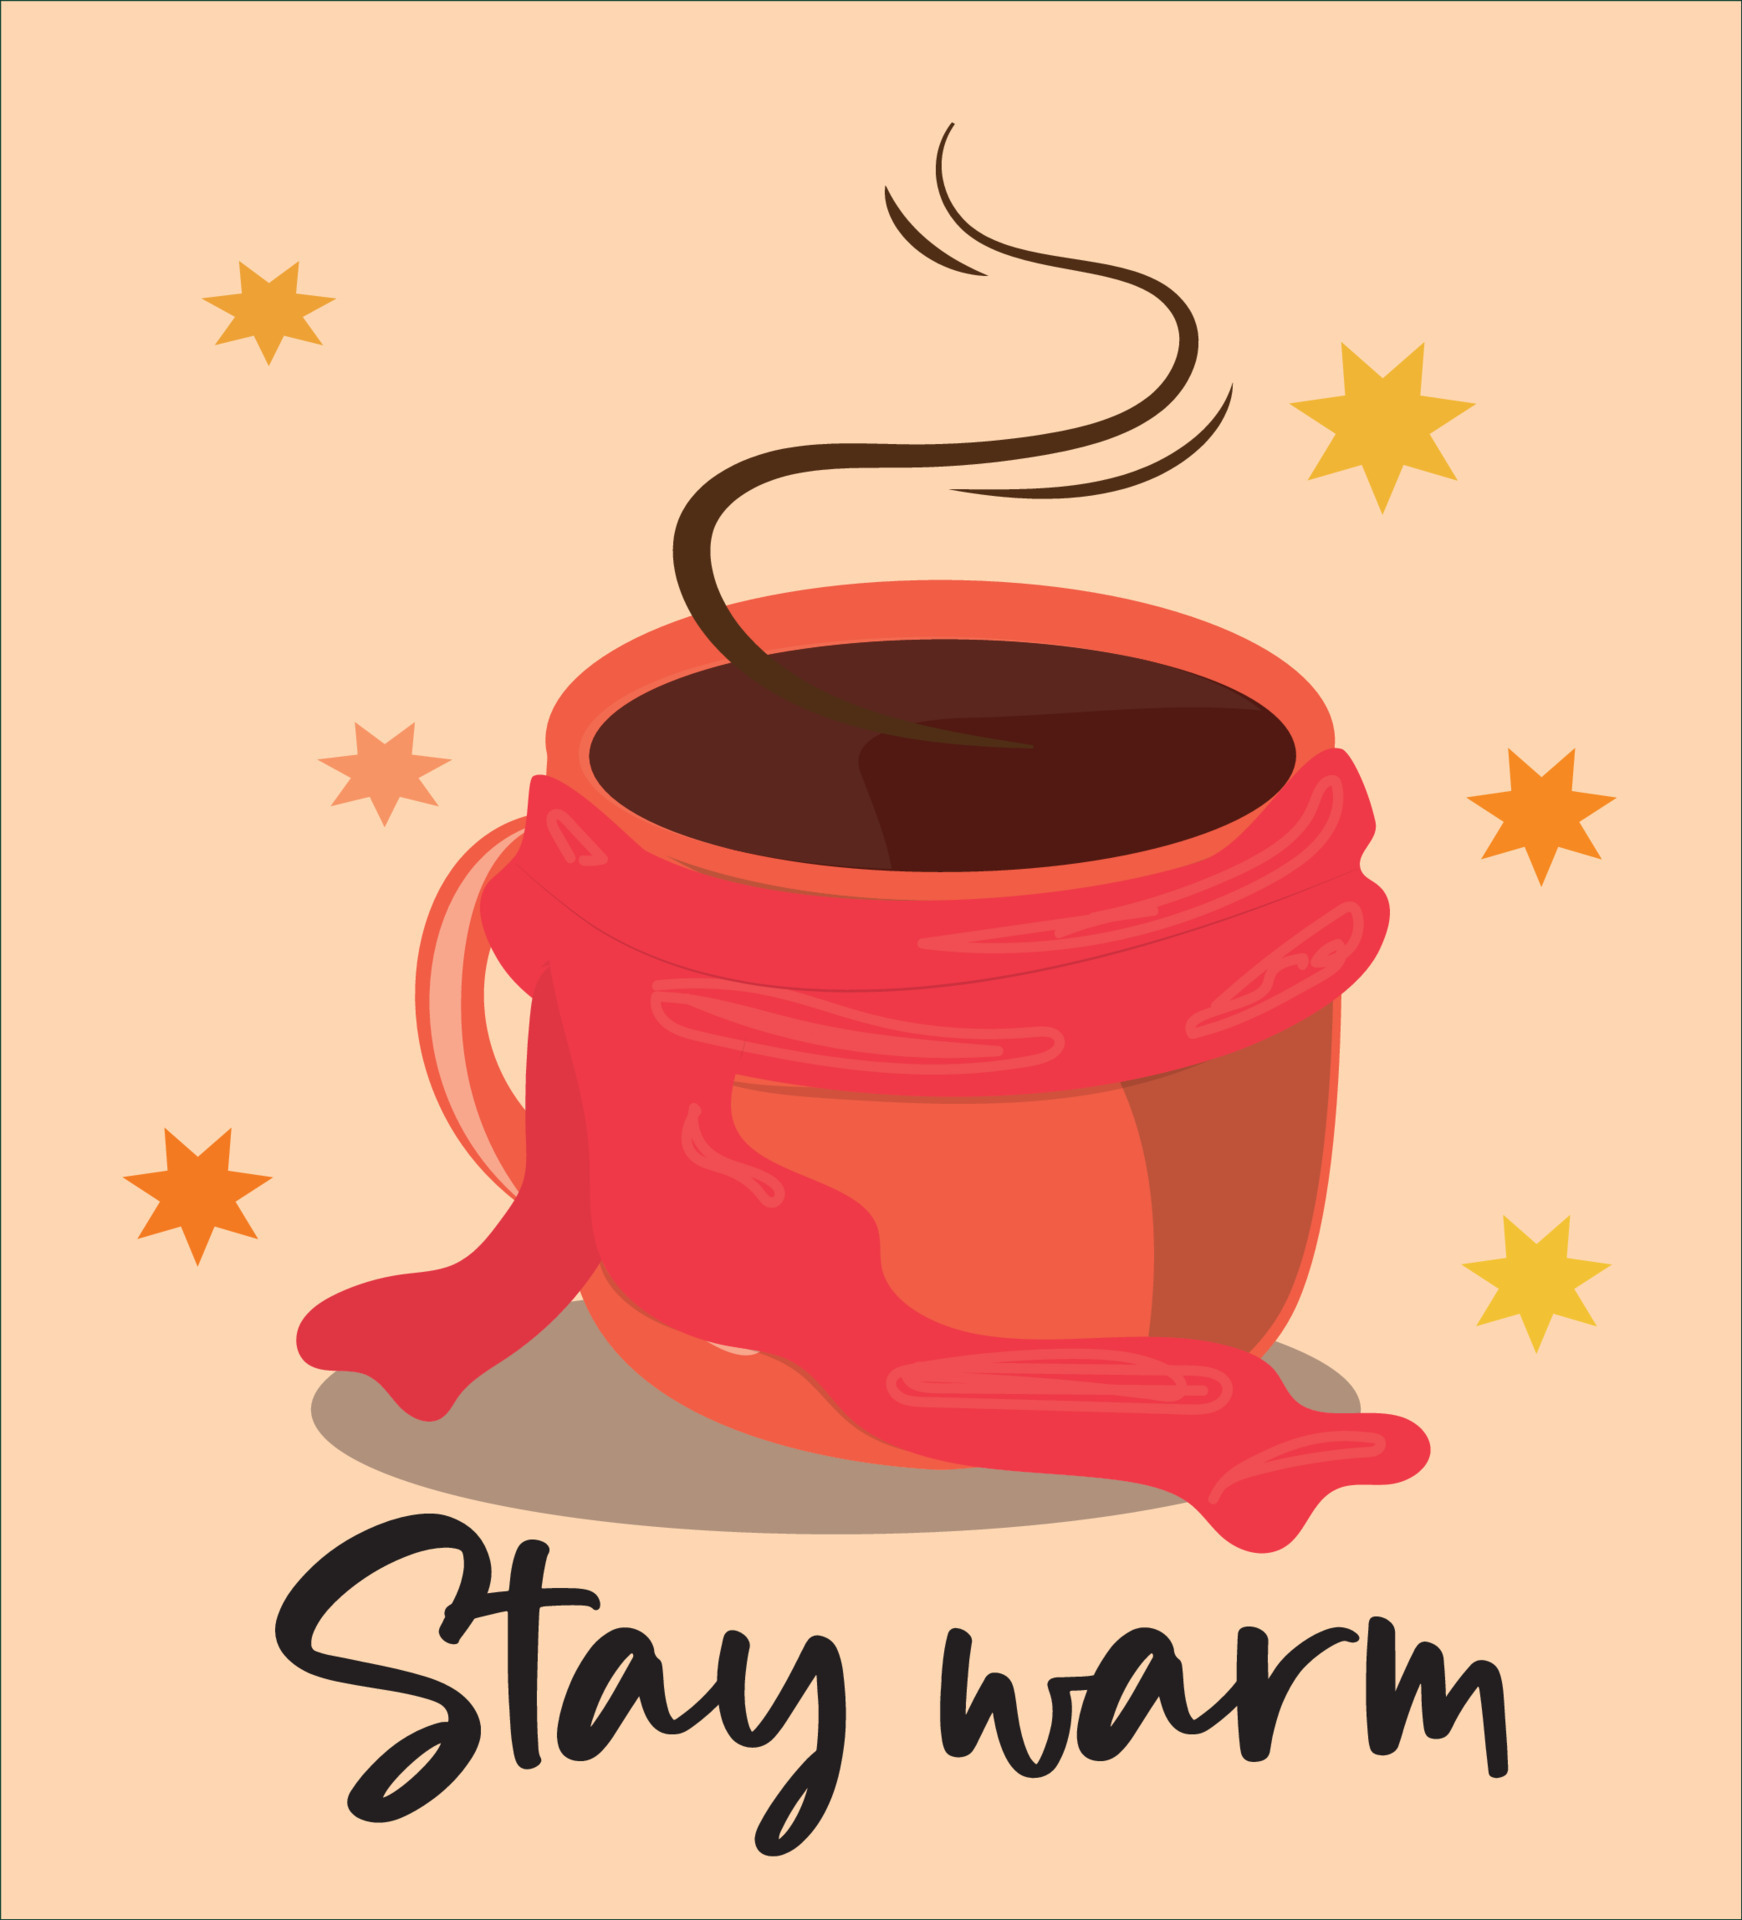 https://static.vecteezy.com/system/resources/previews/013/763/998/original/stay-warm-with-a-warm-cup-of-coffee-free-vector.jpg